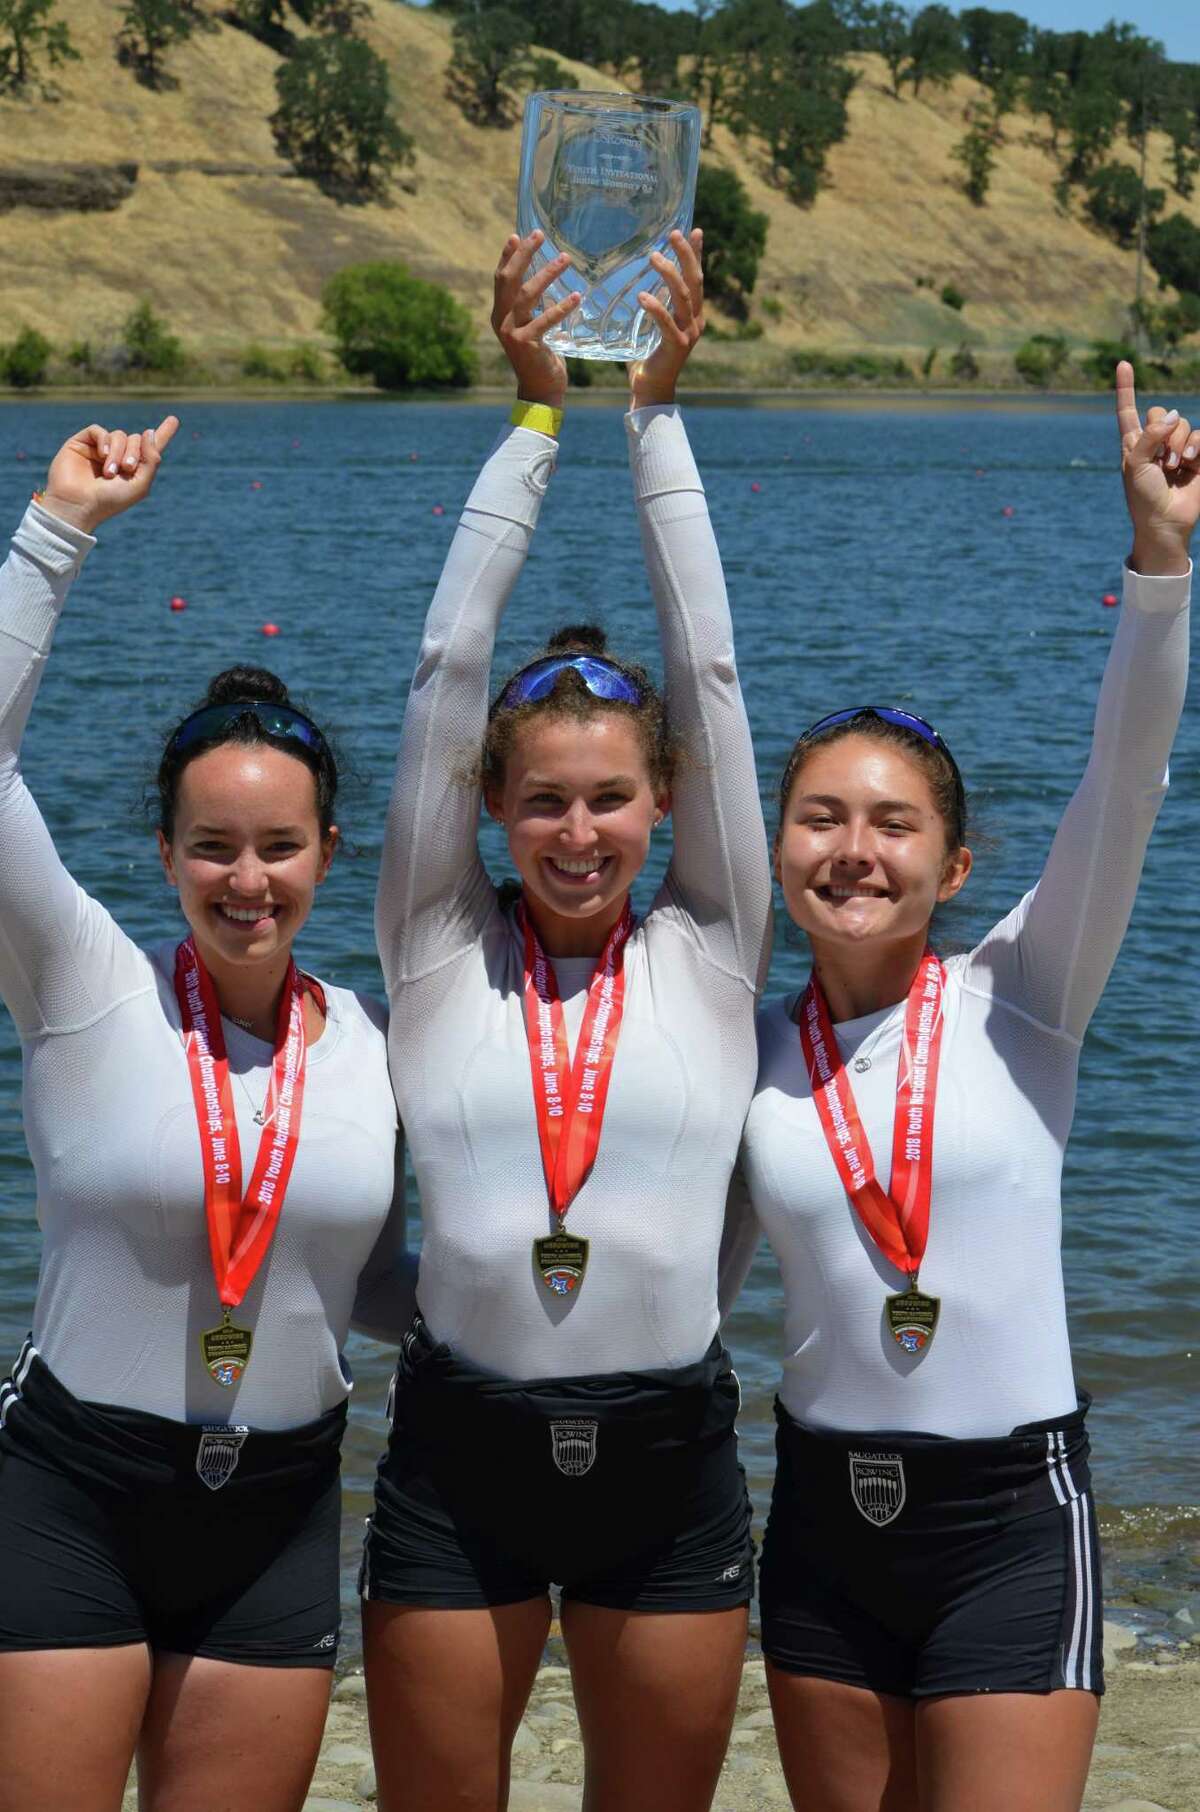 Pictured are three of the six Saugatuck Rowing Club athletes named to the 2018 USRowing Junior National team. All three were members of the SRC womens 8+, which earlier this year won the USRowing Youth National Championships for the fourth year in a row. Left to right, Caitlin Esse, New Canaan; Kelsey McGinley, Westport; and Noelle Amlicke, Westport, along with Isabel Mezei of Fairfield, not pictured.